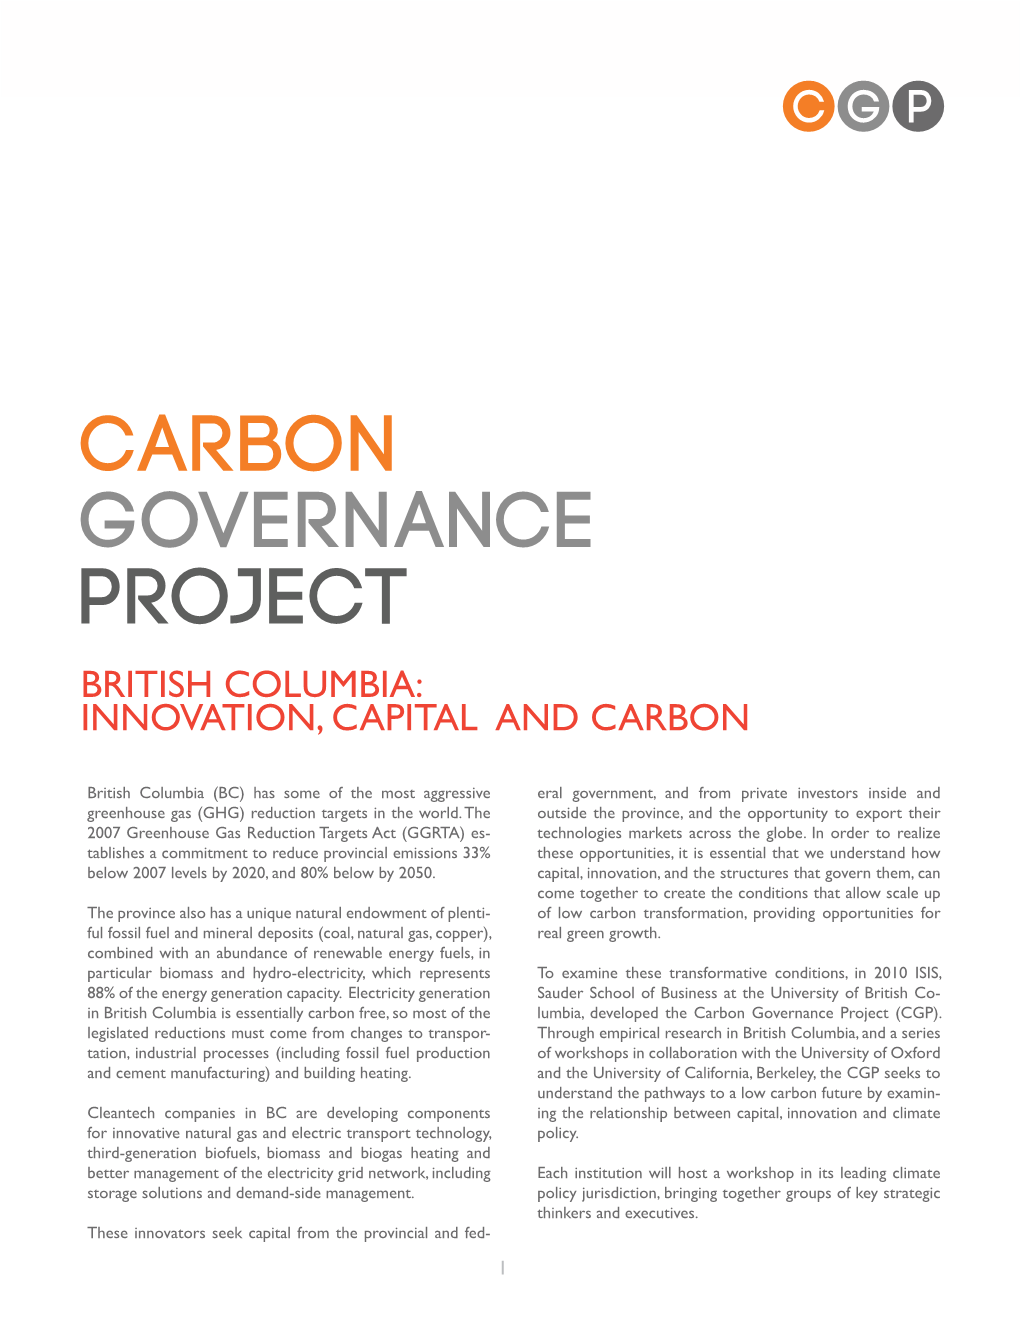 CGP Report on BC Innovation, Capital and Carbon